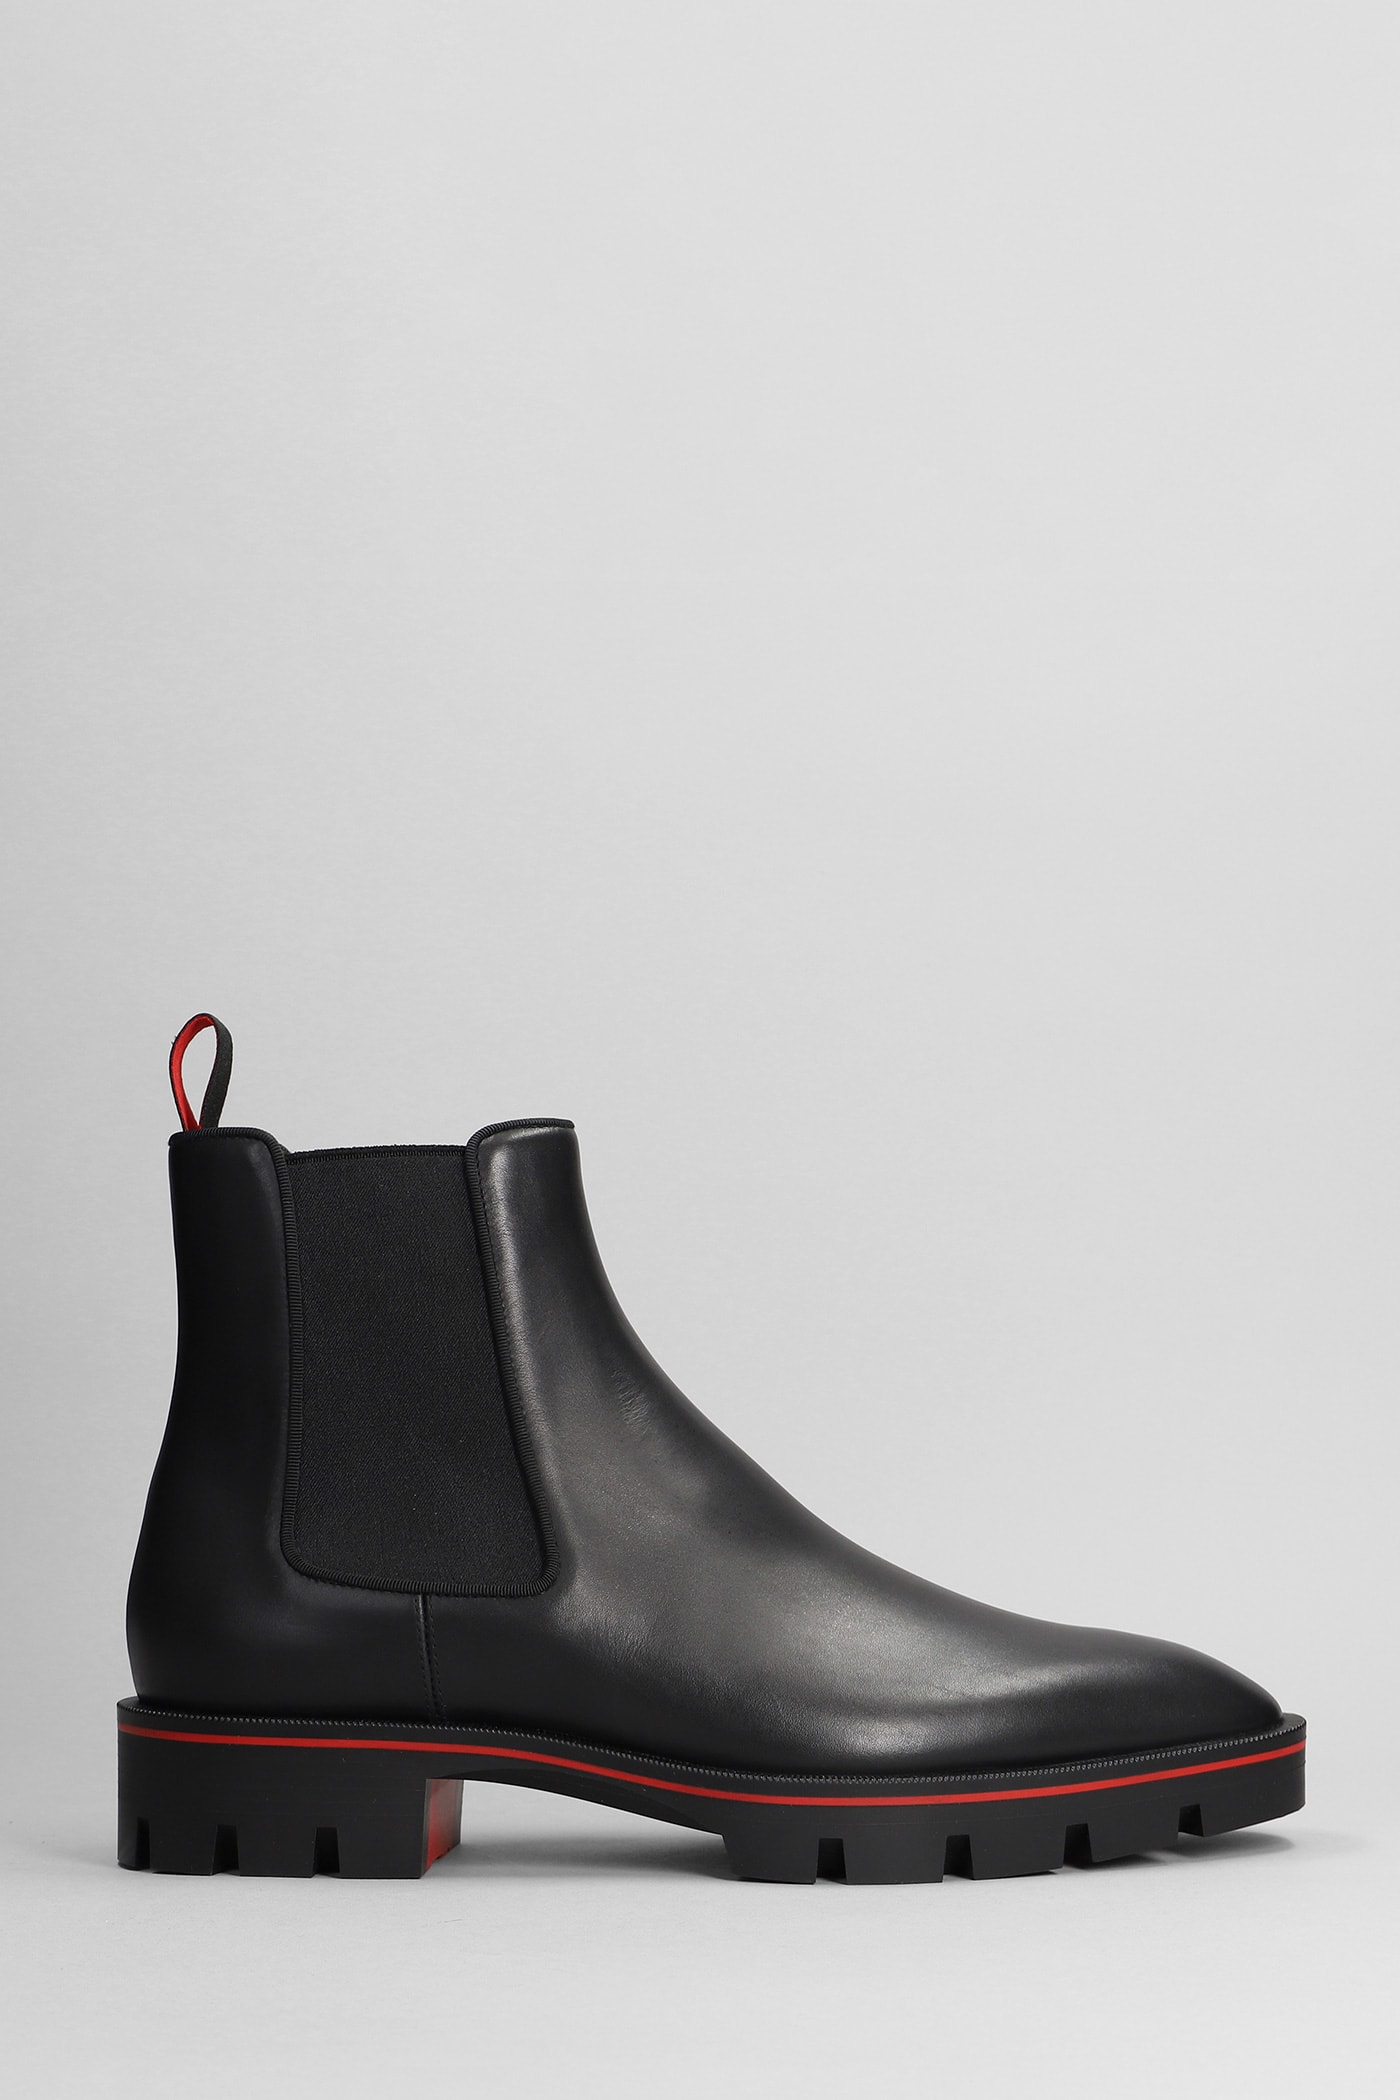 Christian Louboutin Alpinosol Ankle Boots In Black Leather